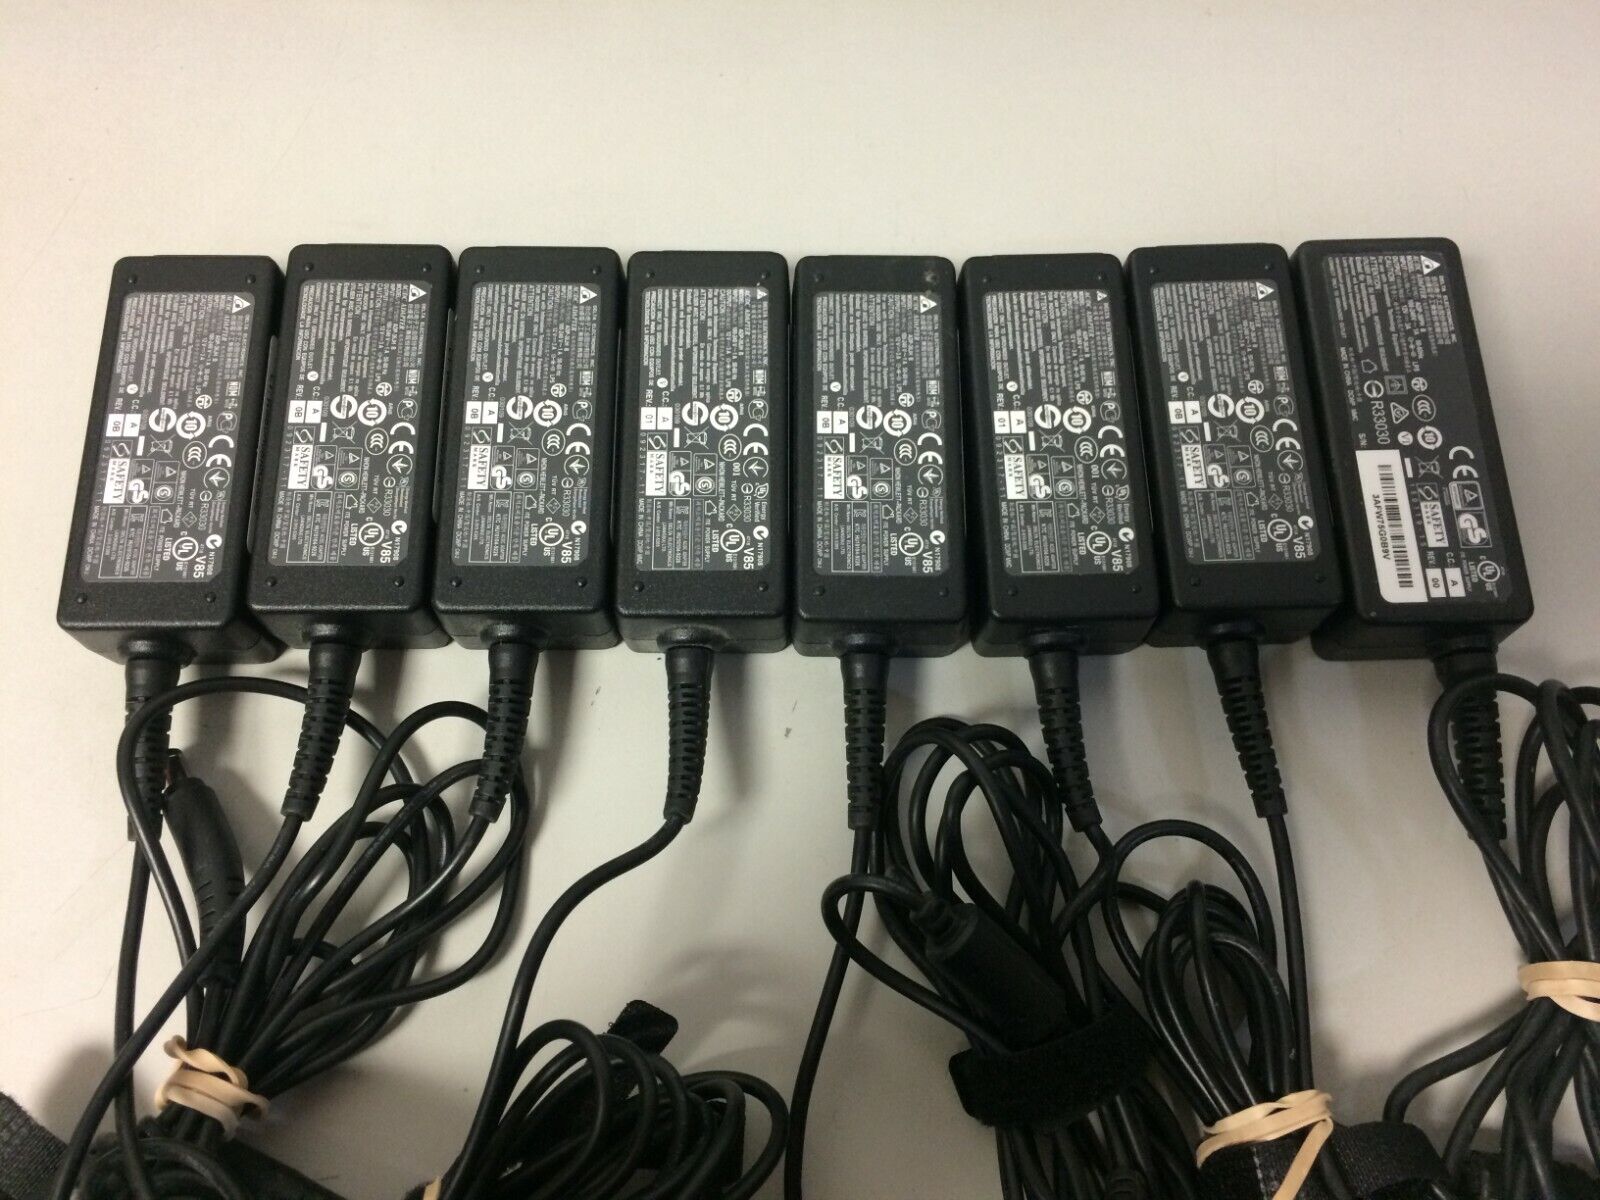 LOT of 8 Delta Electronics 12V 3A (ADP-36JH B) AC Power Adapters 5.5mm 